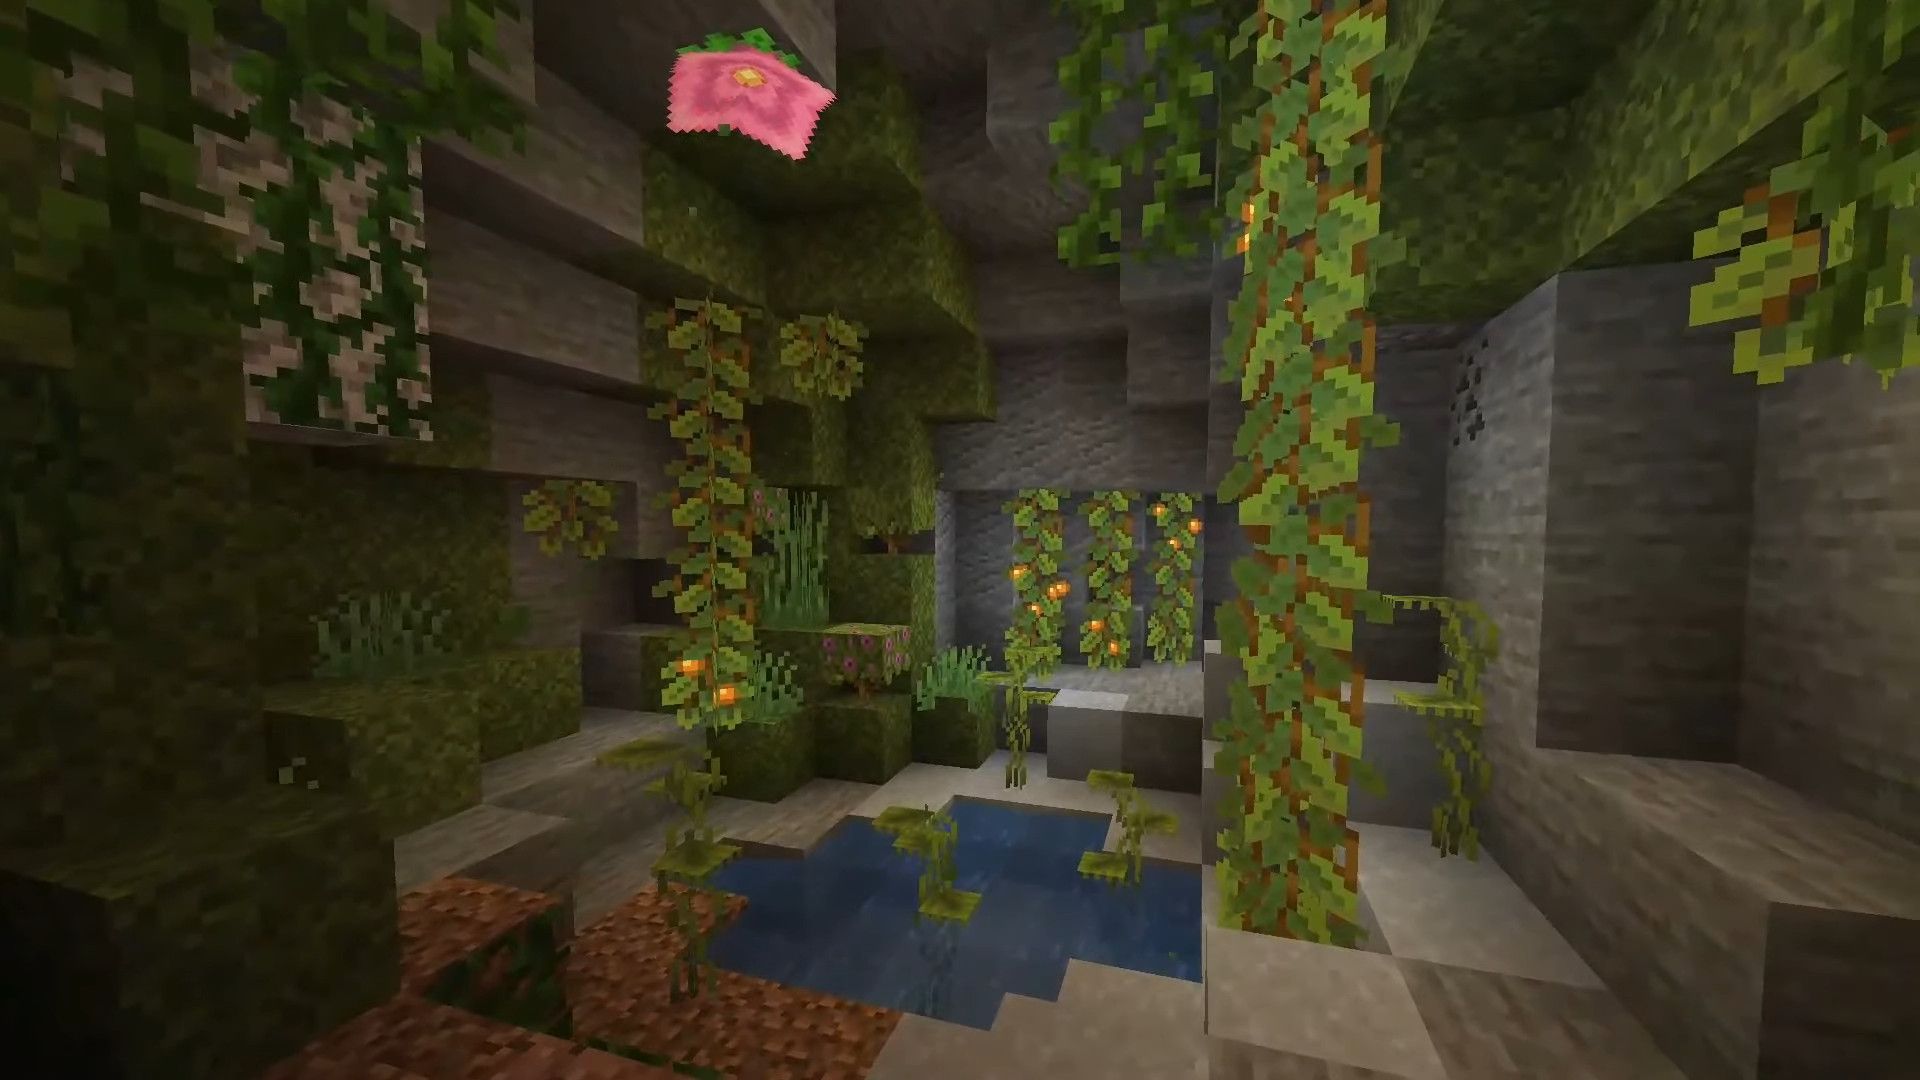 Minecraft Caves and Cliffs snapshot shows off glowing berries and more